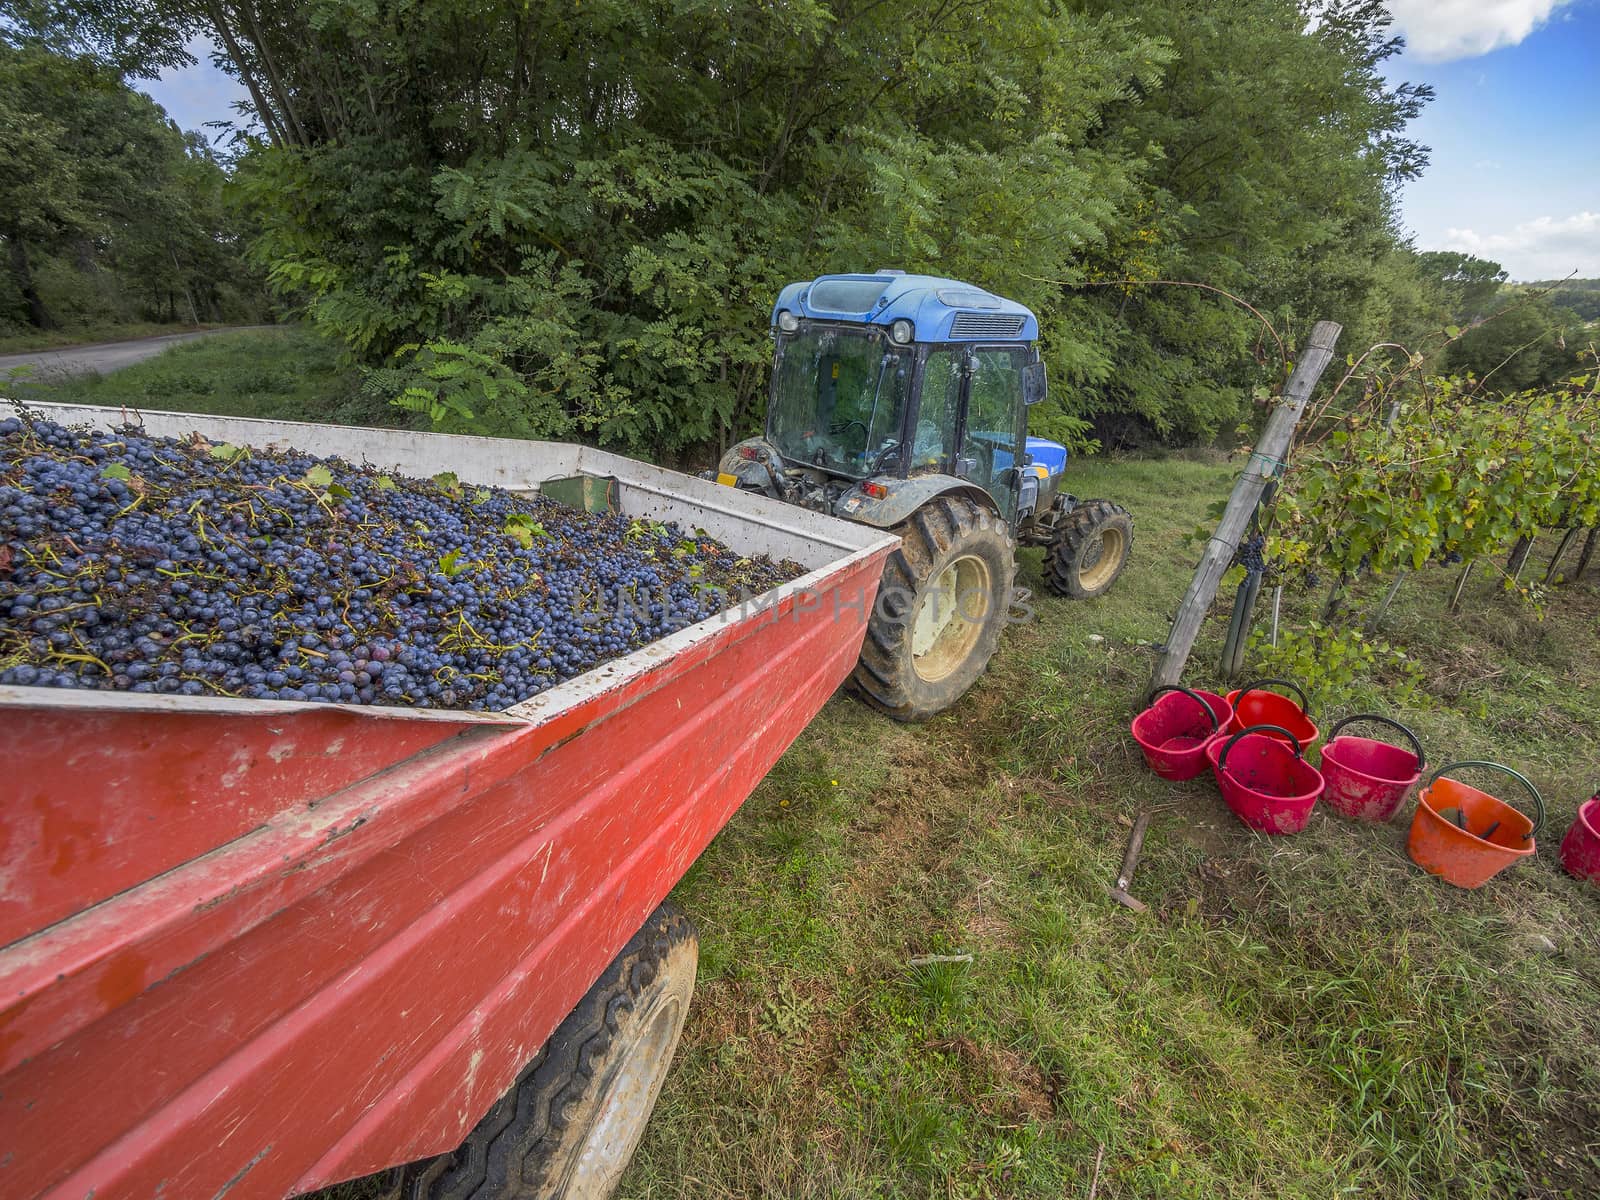 harvesting grapes in the vineyards of Tuscany